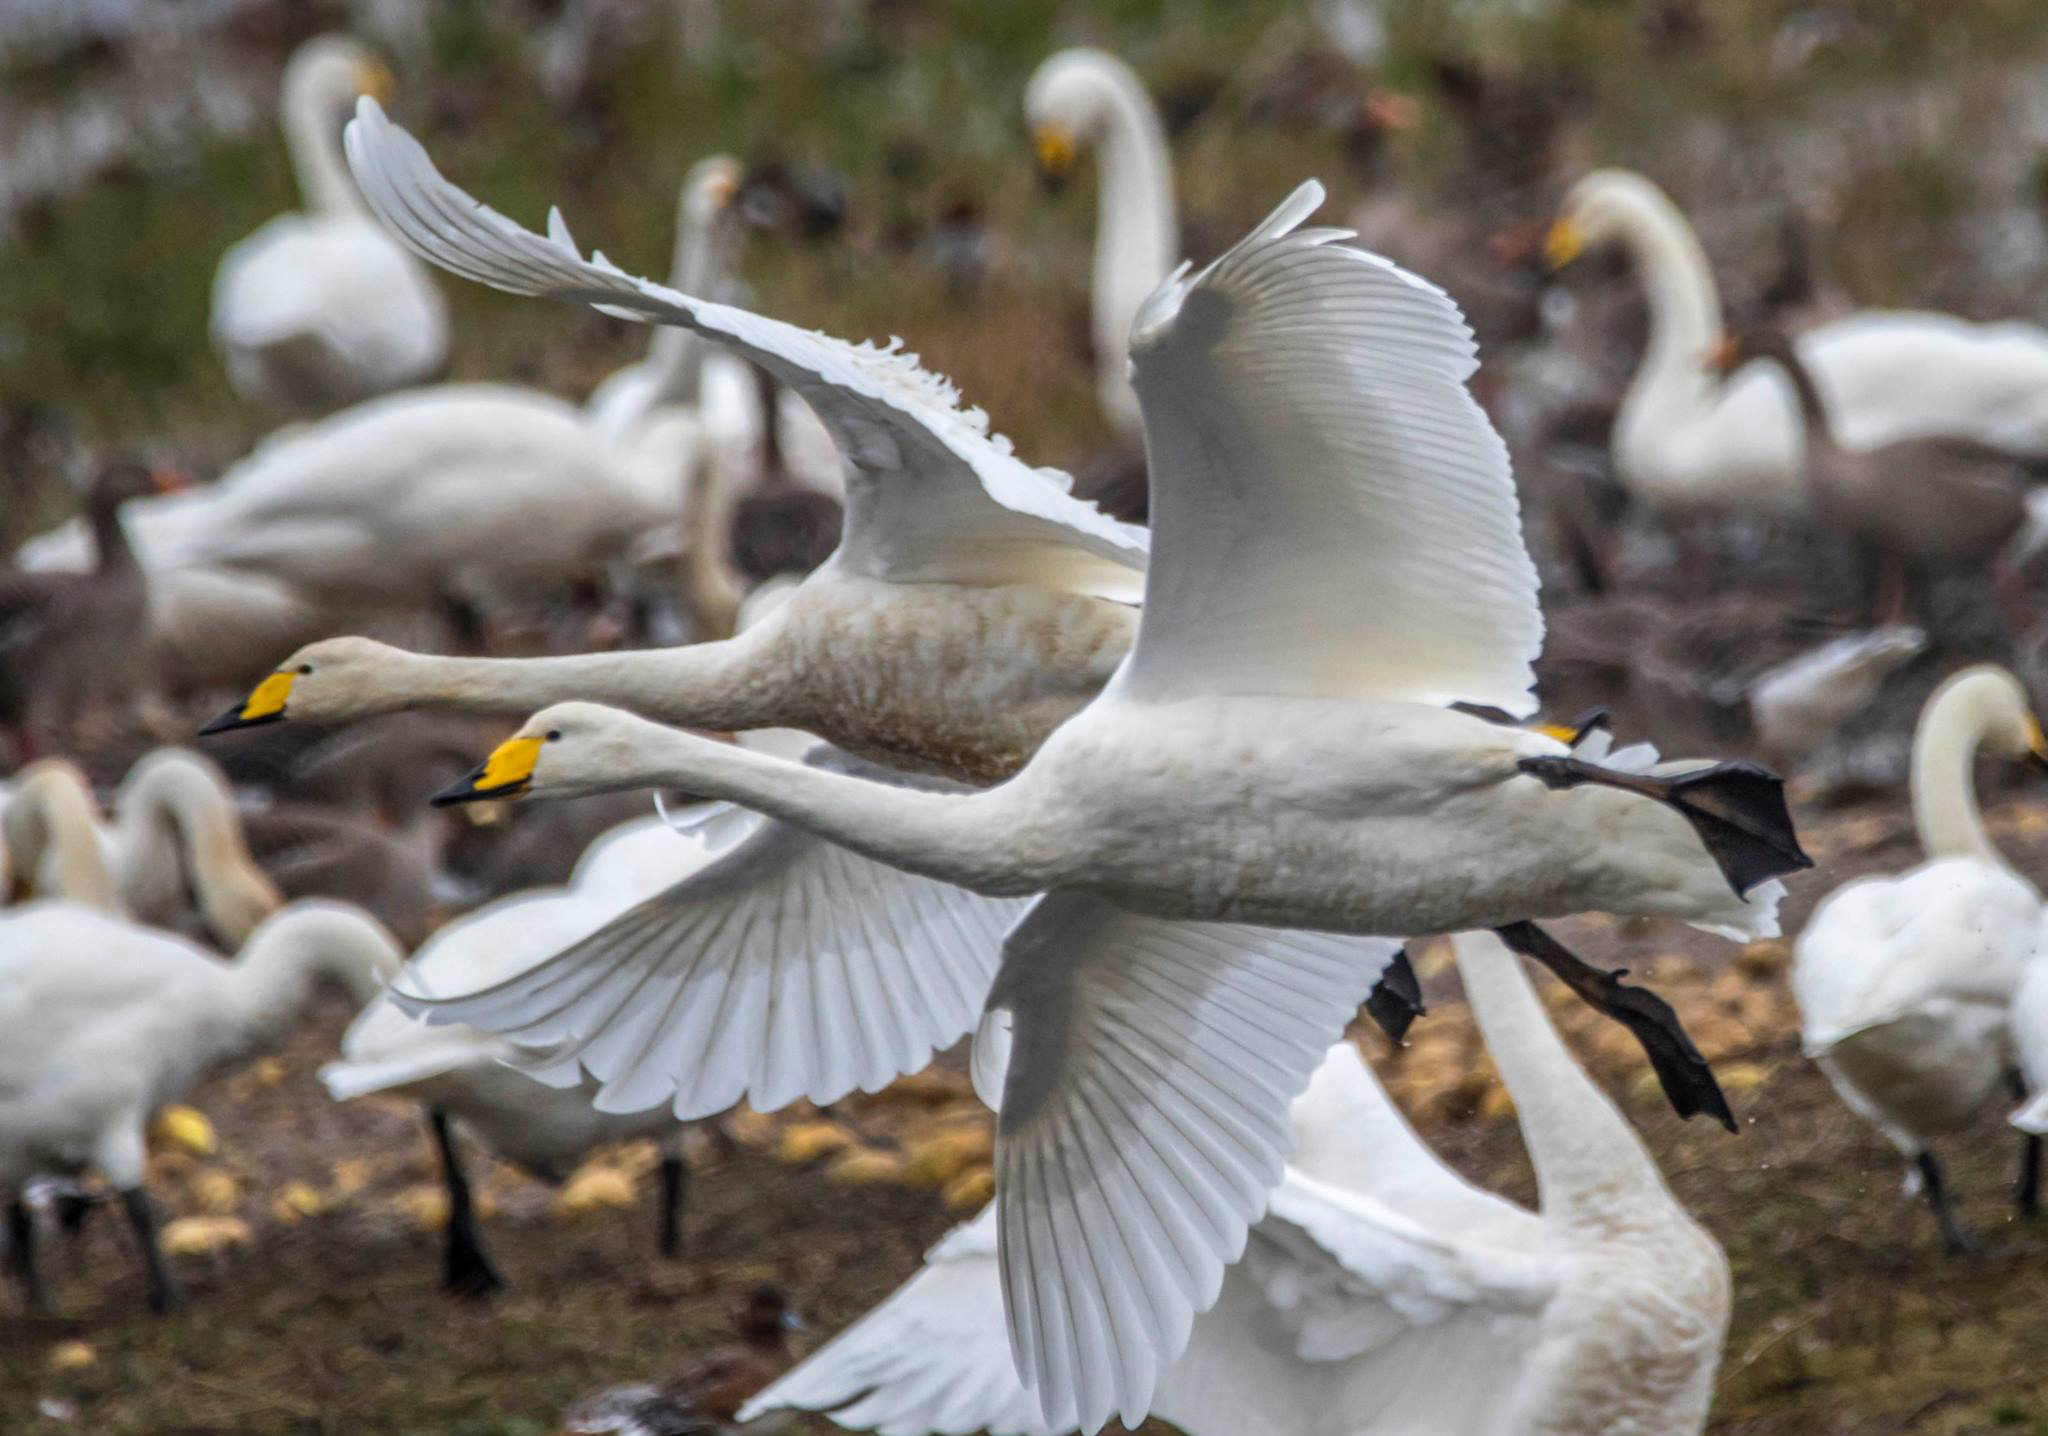 Whooper swans by Heather Lowe